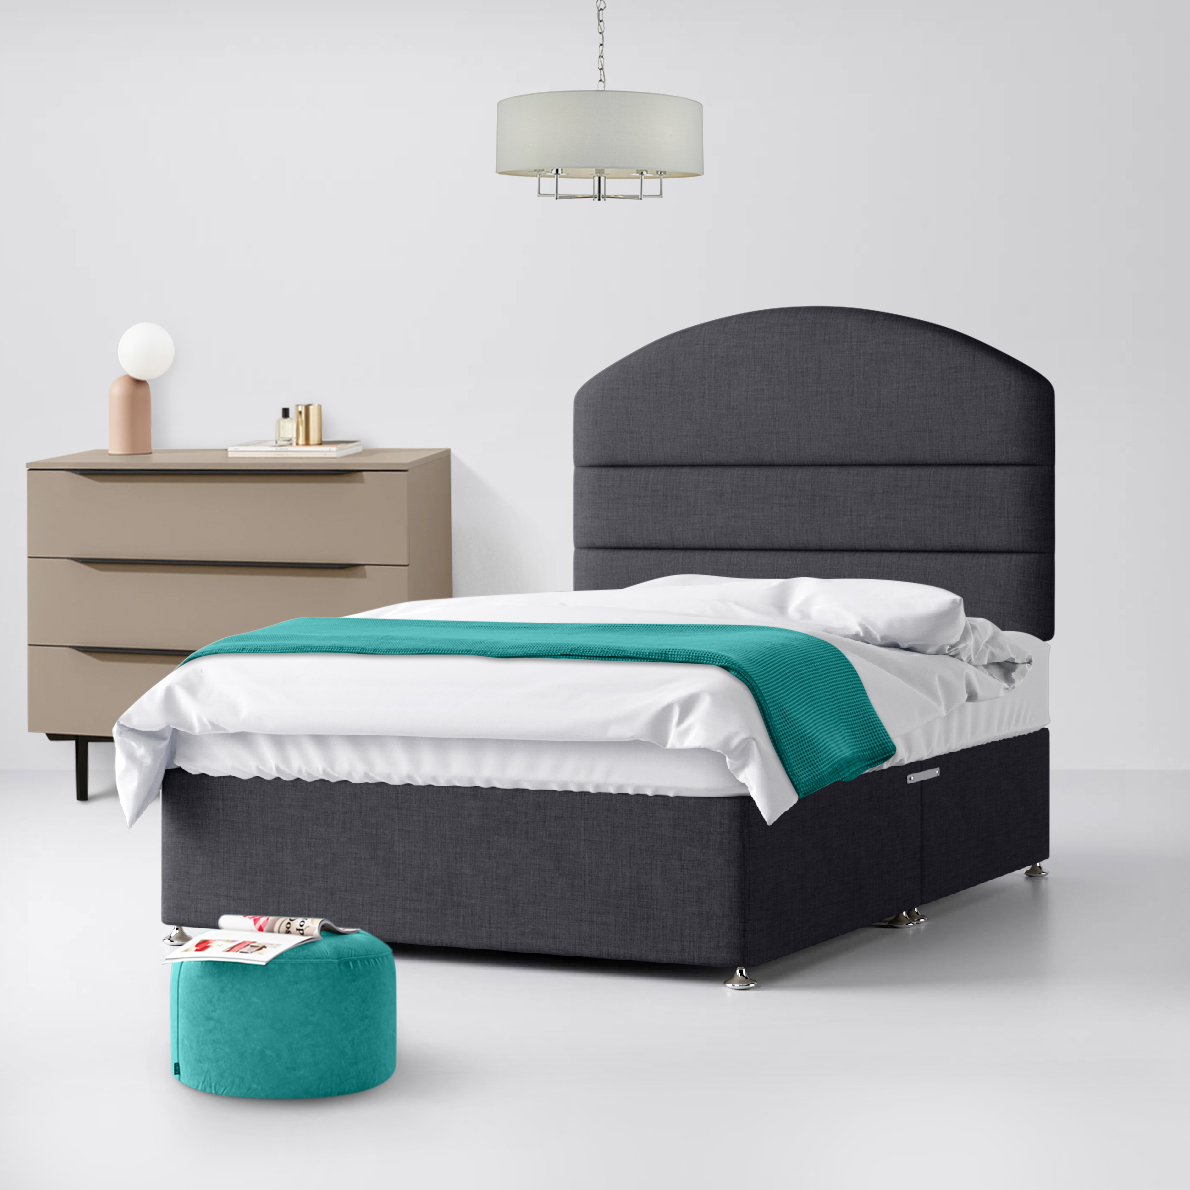 Single - Divan Bed and Dudley Lined Headboard - Dark Grey - Charcoal - Fabric - 3ft - Happy Beds